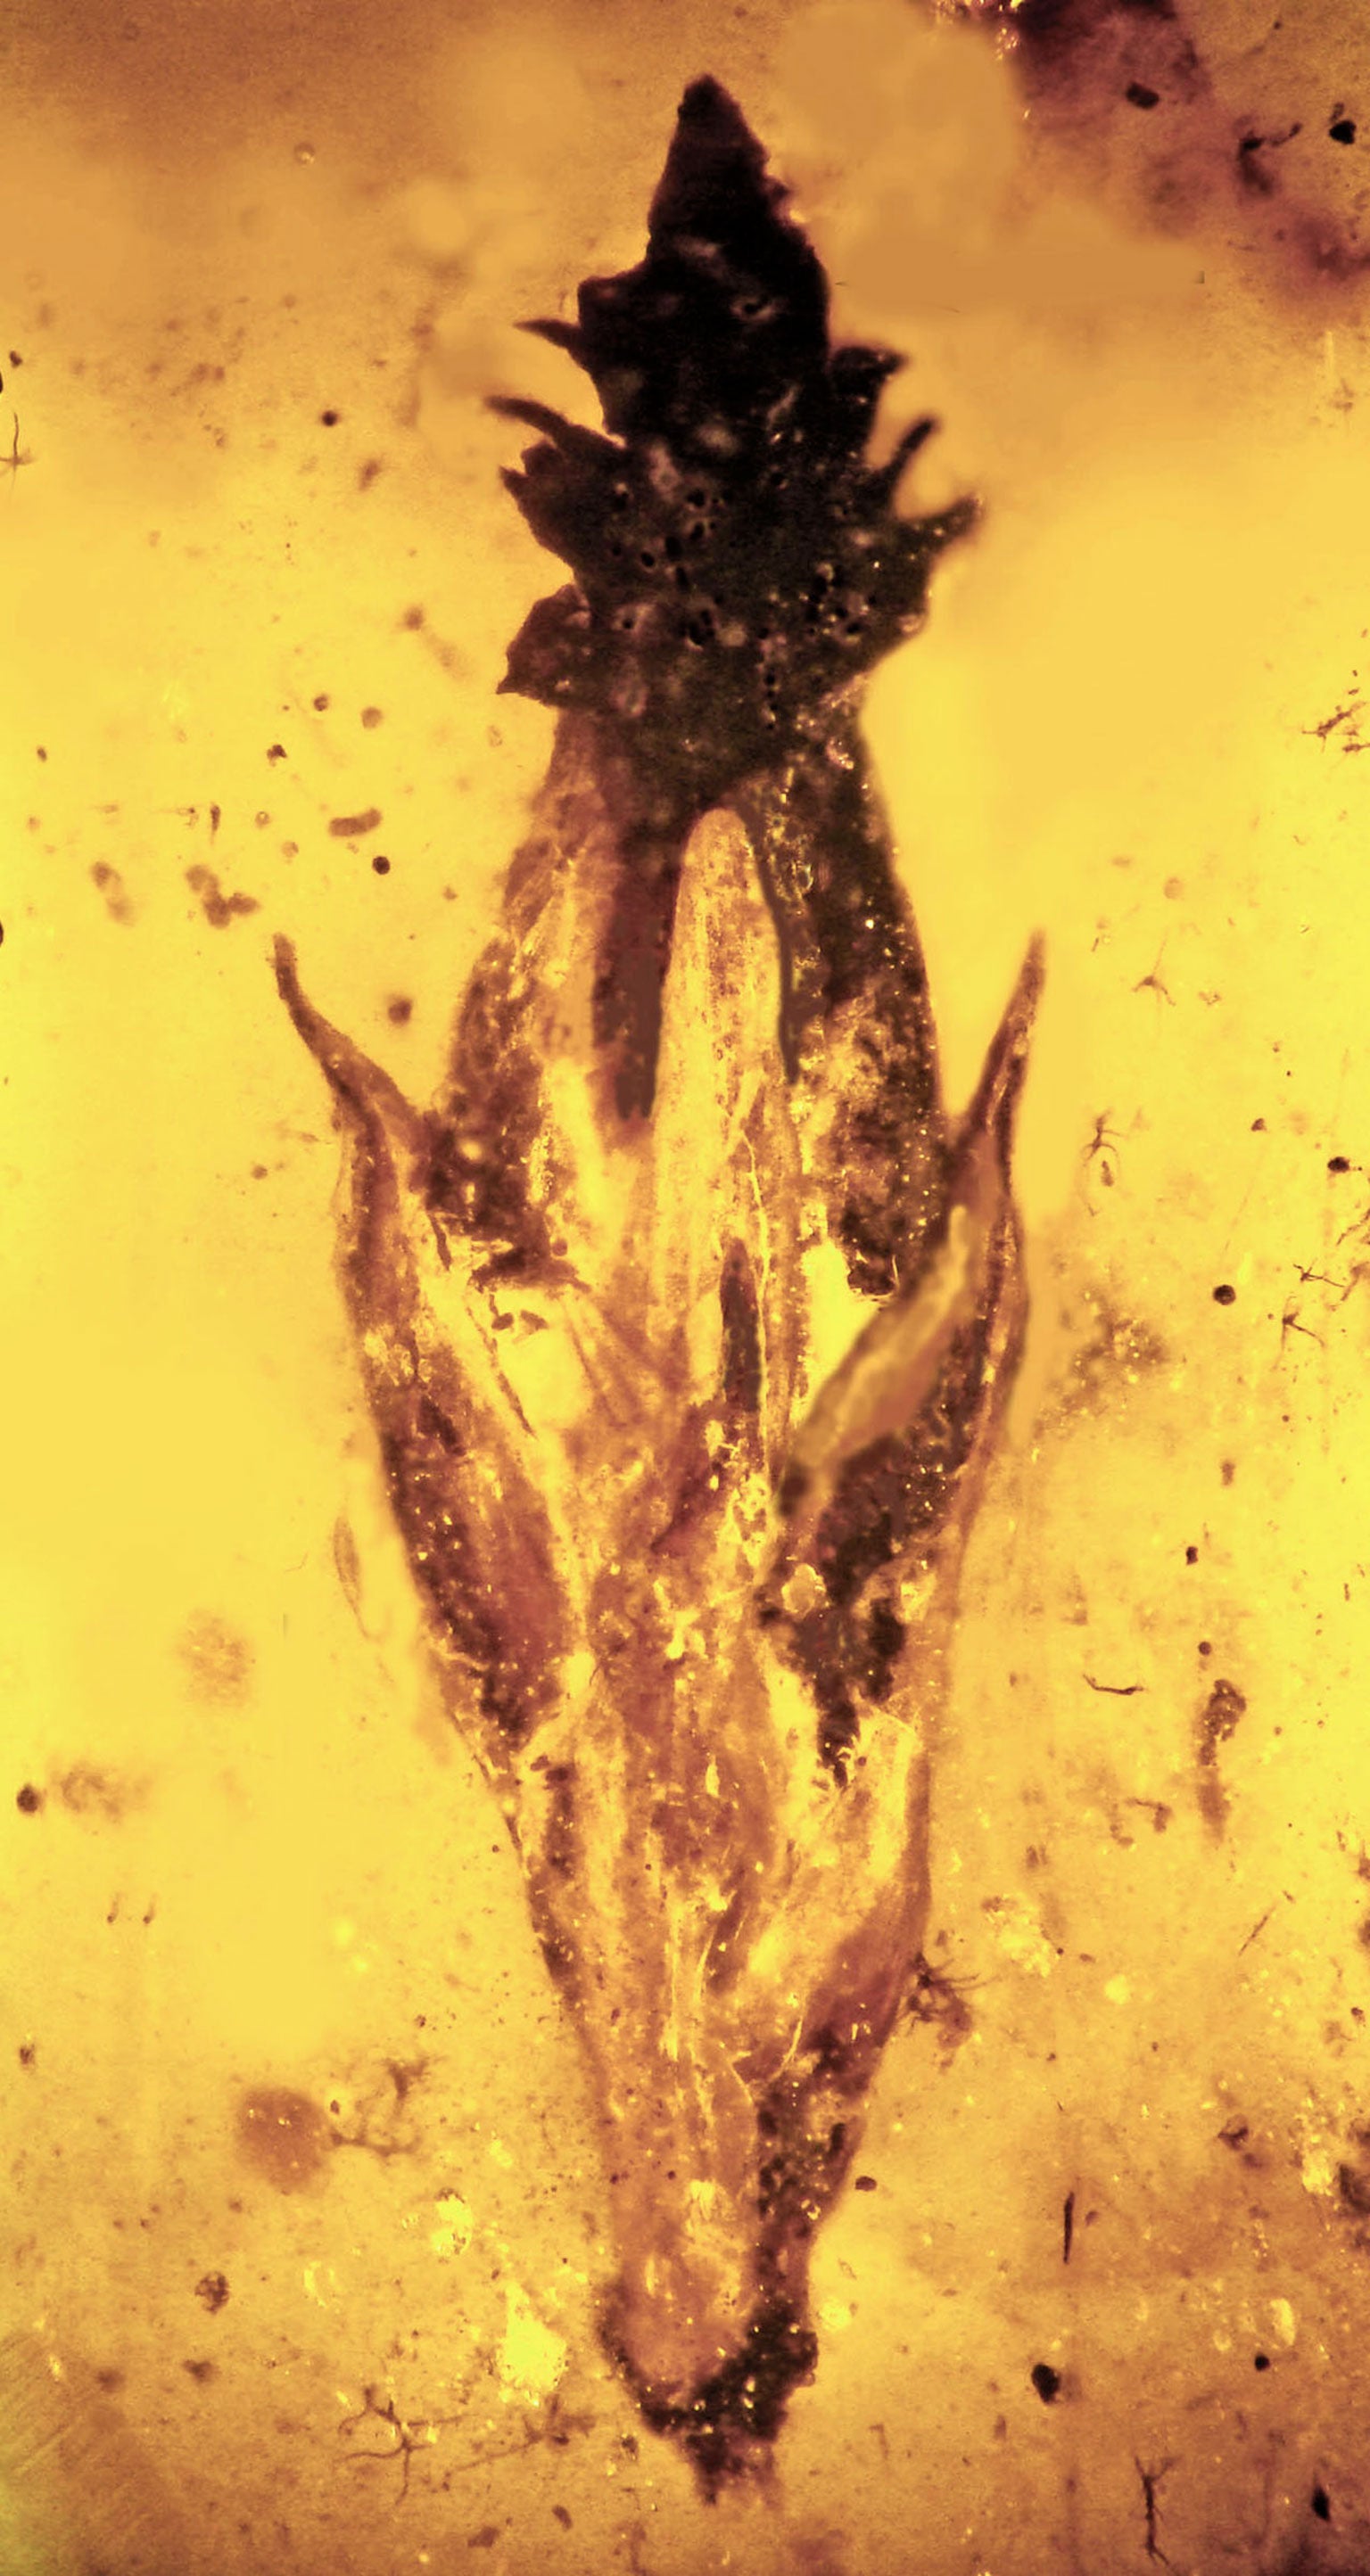 This grass spikelet from the middle Cretaceous is about 100 million years old, preserved in amber as the earliest fossil ever found of the evolution of grass, and covered on its tip by the parasite ergot